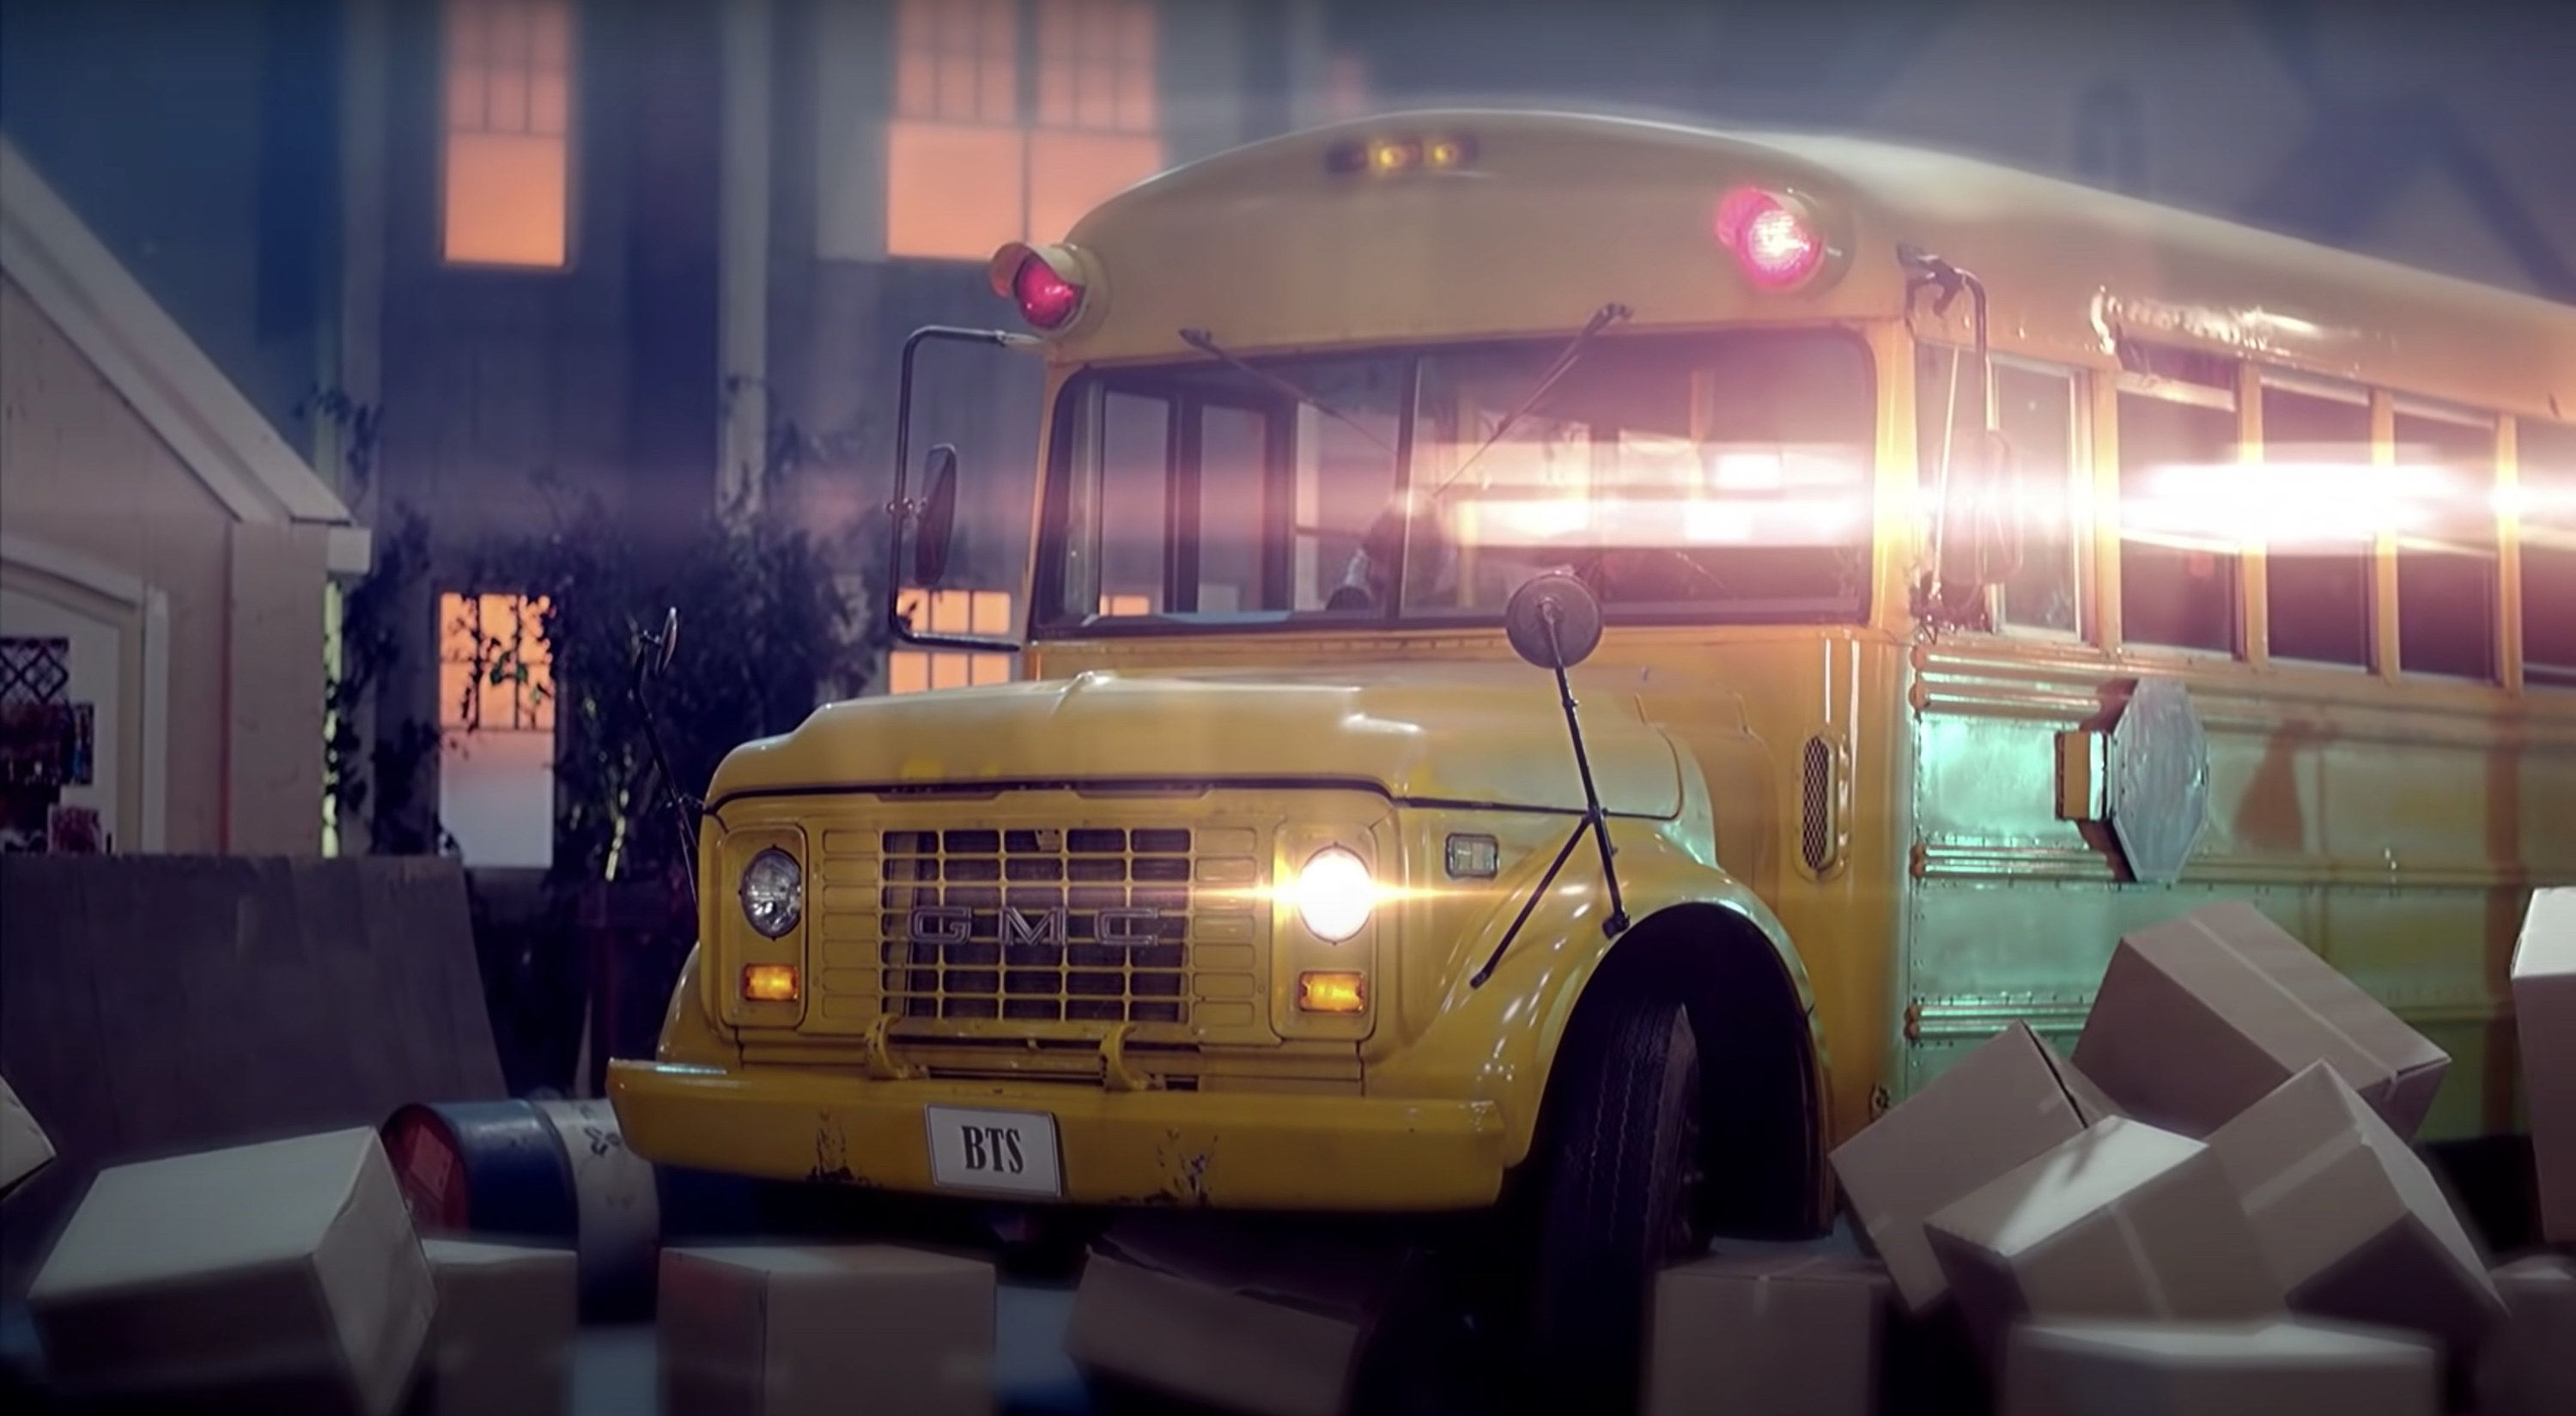 A still from a music video shows a school bus with the license plate &quot;BTS&quot;